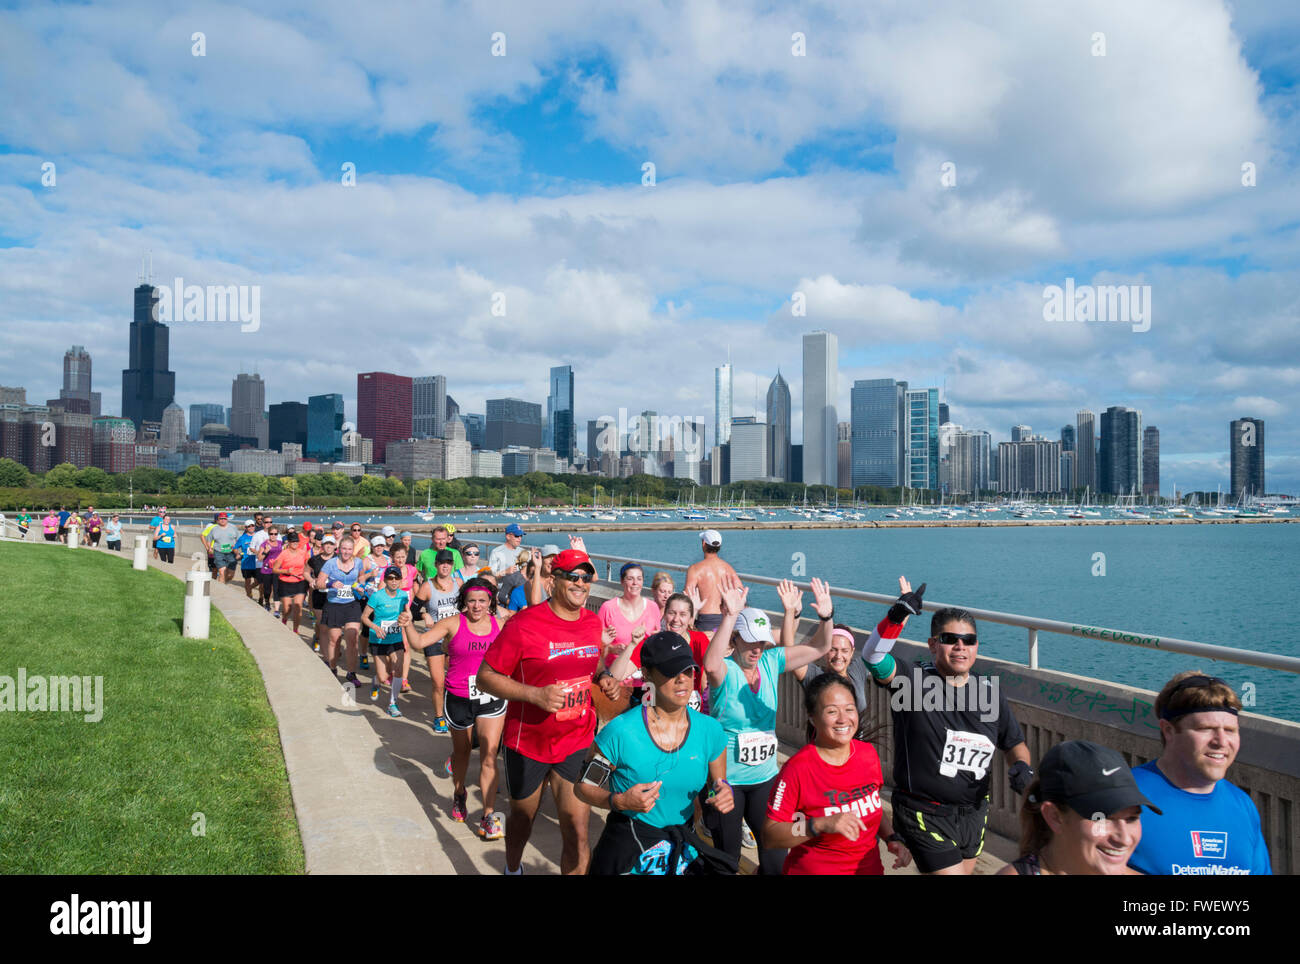 The Chicago Marathon along the lakefront, Downtown Chicago, Illinois, United States of America, North America Stock Photo